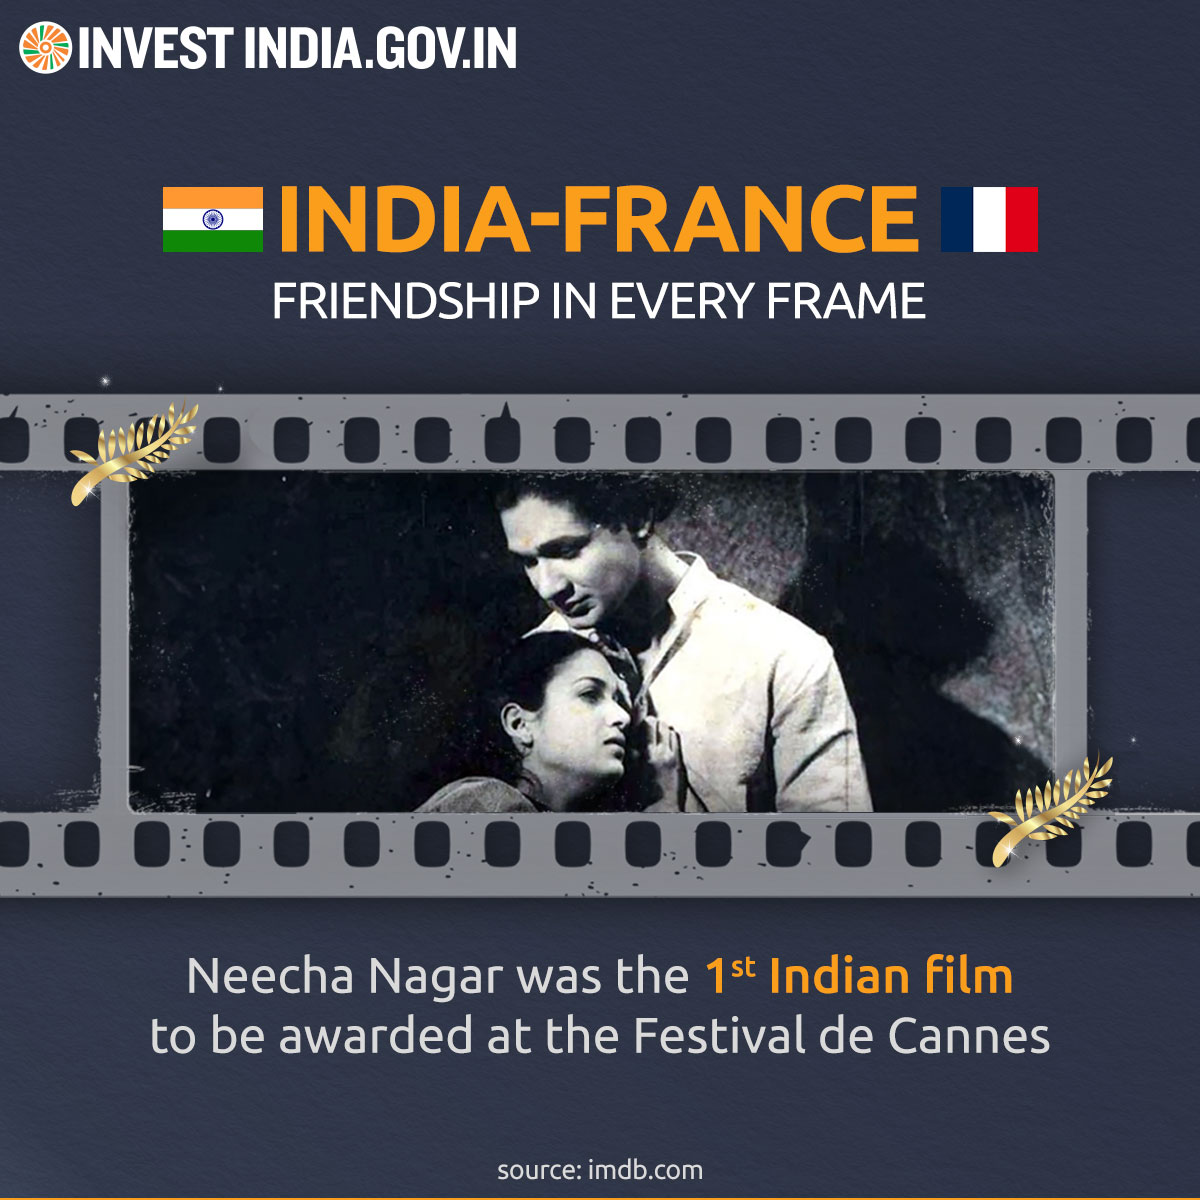 In 1946, #IndianCinema made its mark with the prestigious Palme d’Or win at the #CannesFilmFestival, courtesy of #NeechaNagar, igniting a legacy that continues to inspire #filmmakers in India till today.

Know more: bit.ly/II-France

#IndiaAndTheWorld #InvestInIndia